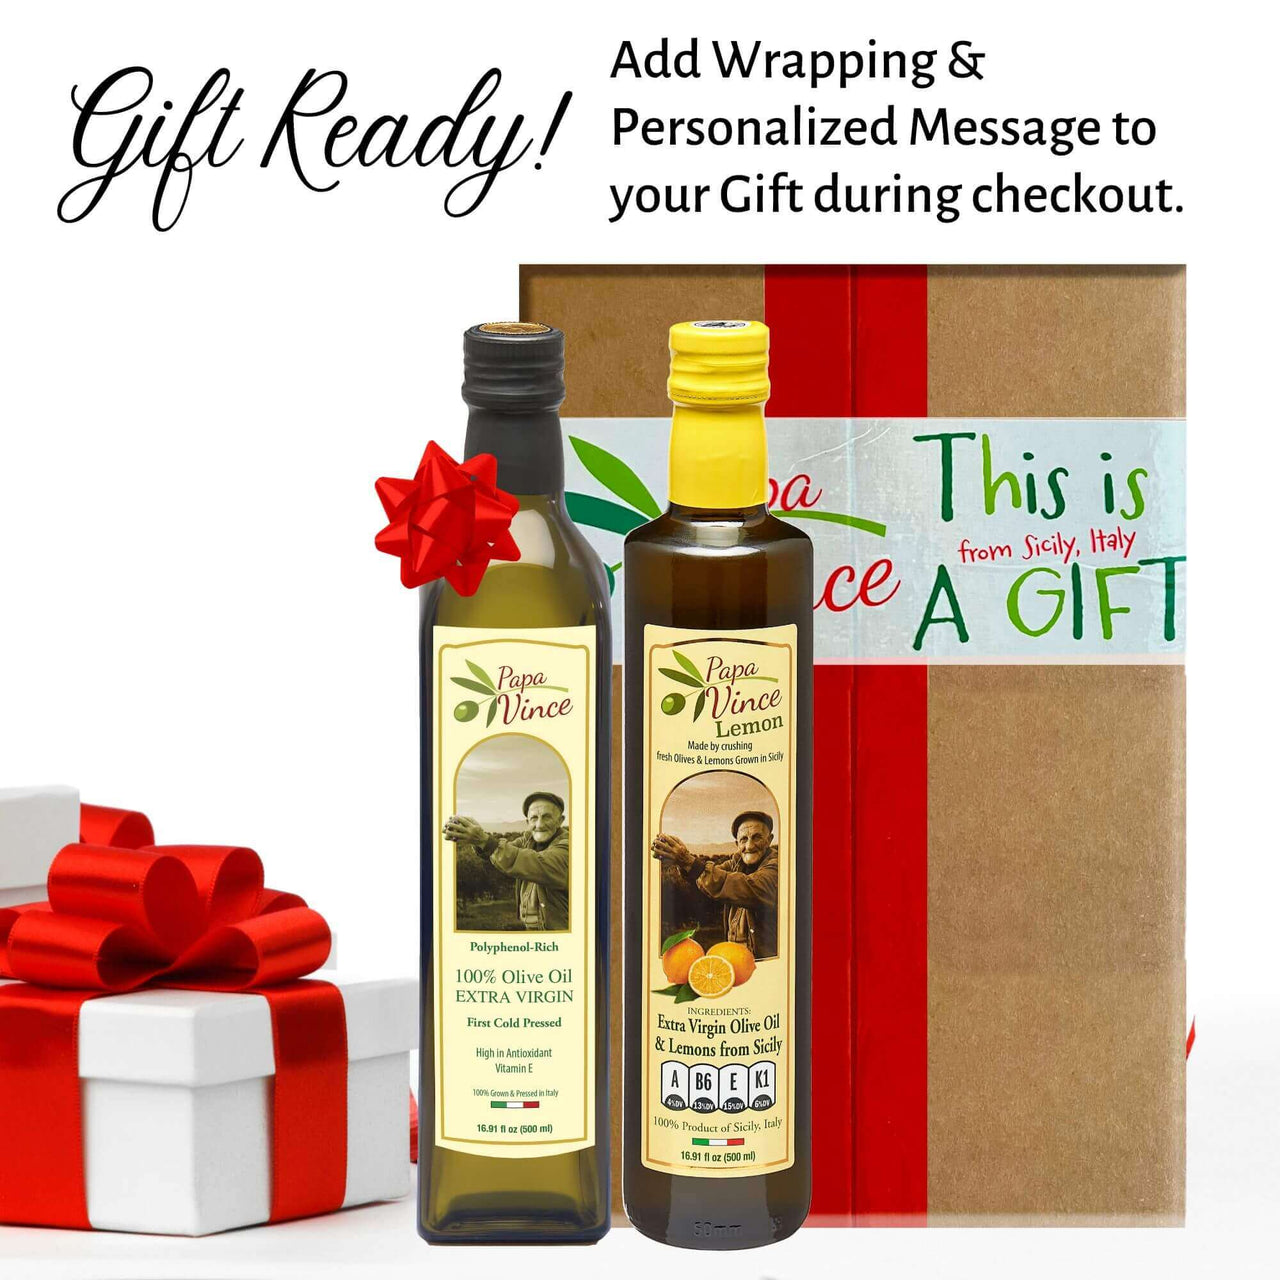 Polyphenol Rich Olive Oil, Good Tasting, Cold Pressed, Extra Virgin Agrumato Fused Lemon Olive Oil from Sicily, Italy. 2-Piece Gift Set - Papa Vince